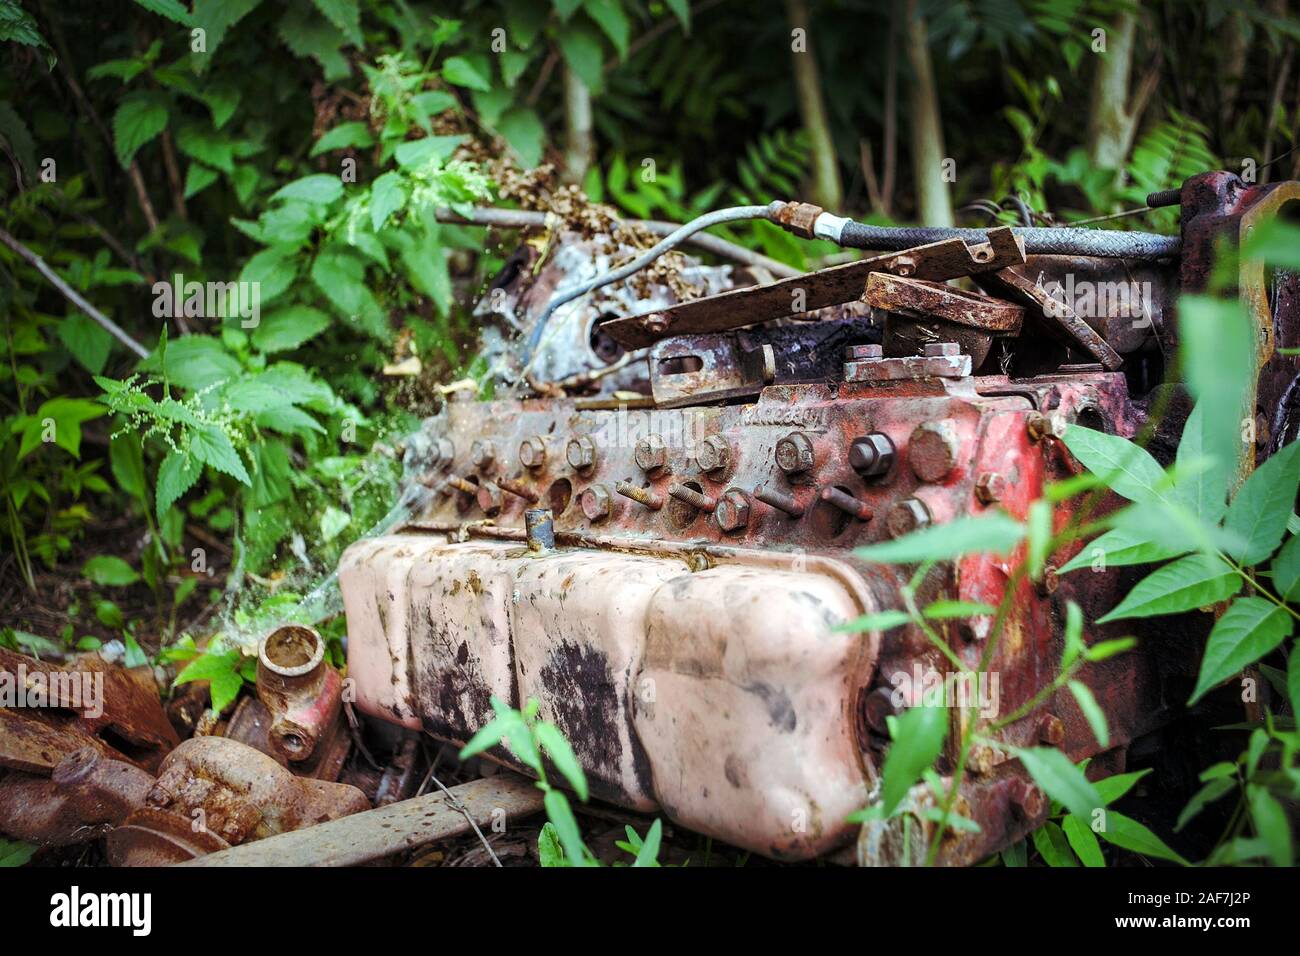 Old and rusty truck engine laying in the forest. Stock Photo